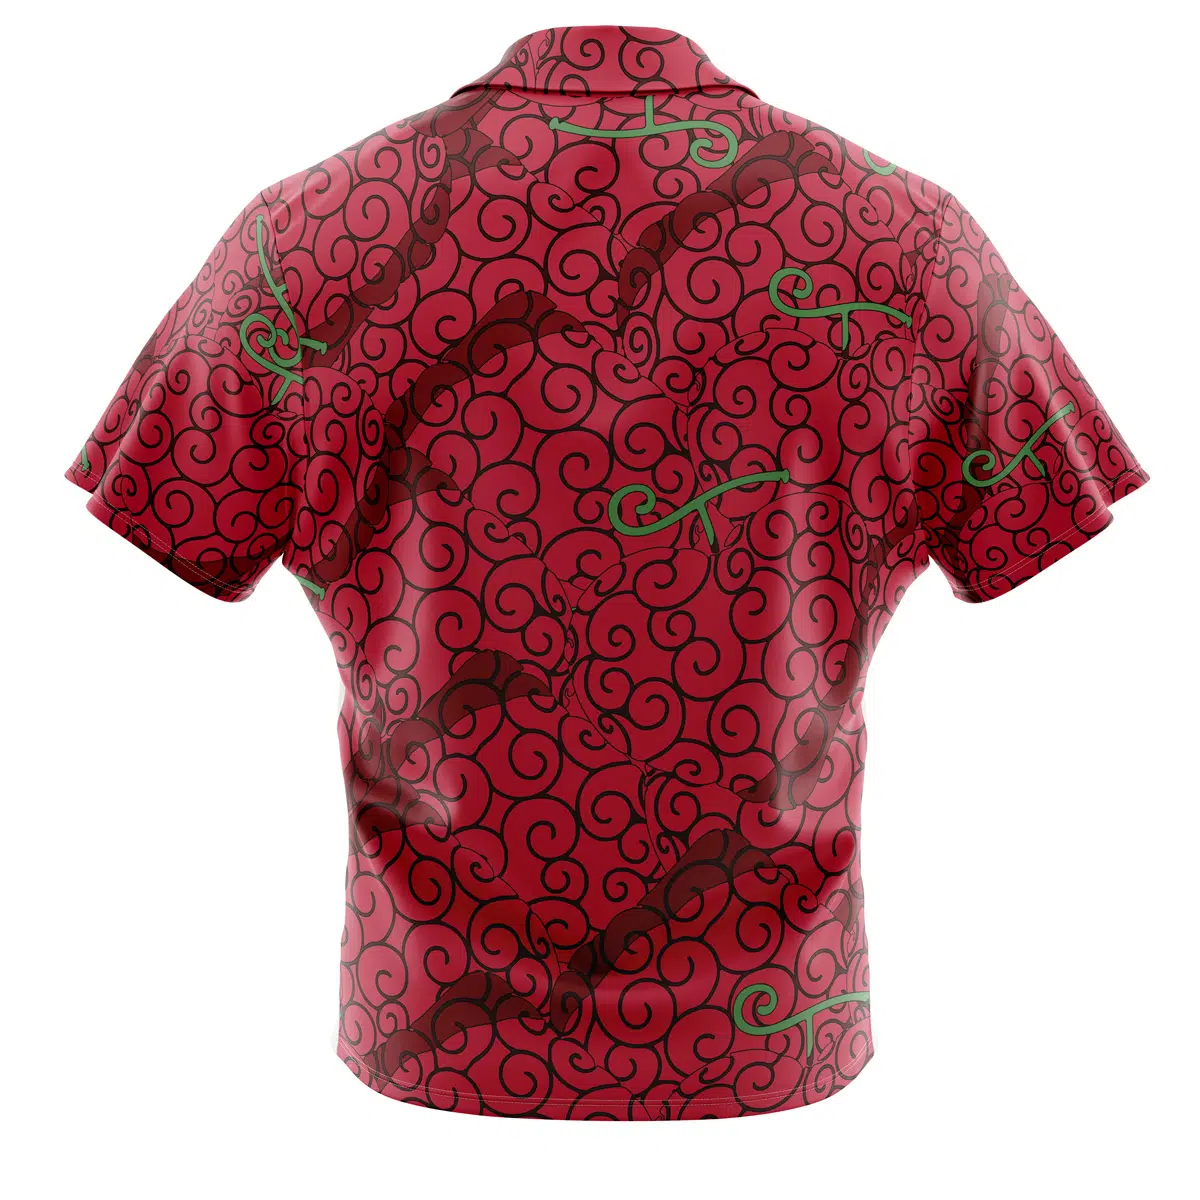 Red Ope Ope No Mi Devil Fruit One Piece Hawaiian Shirt, Law Button Up Shirts